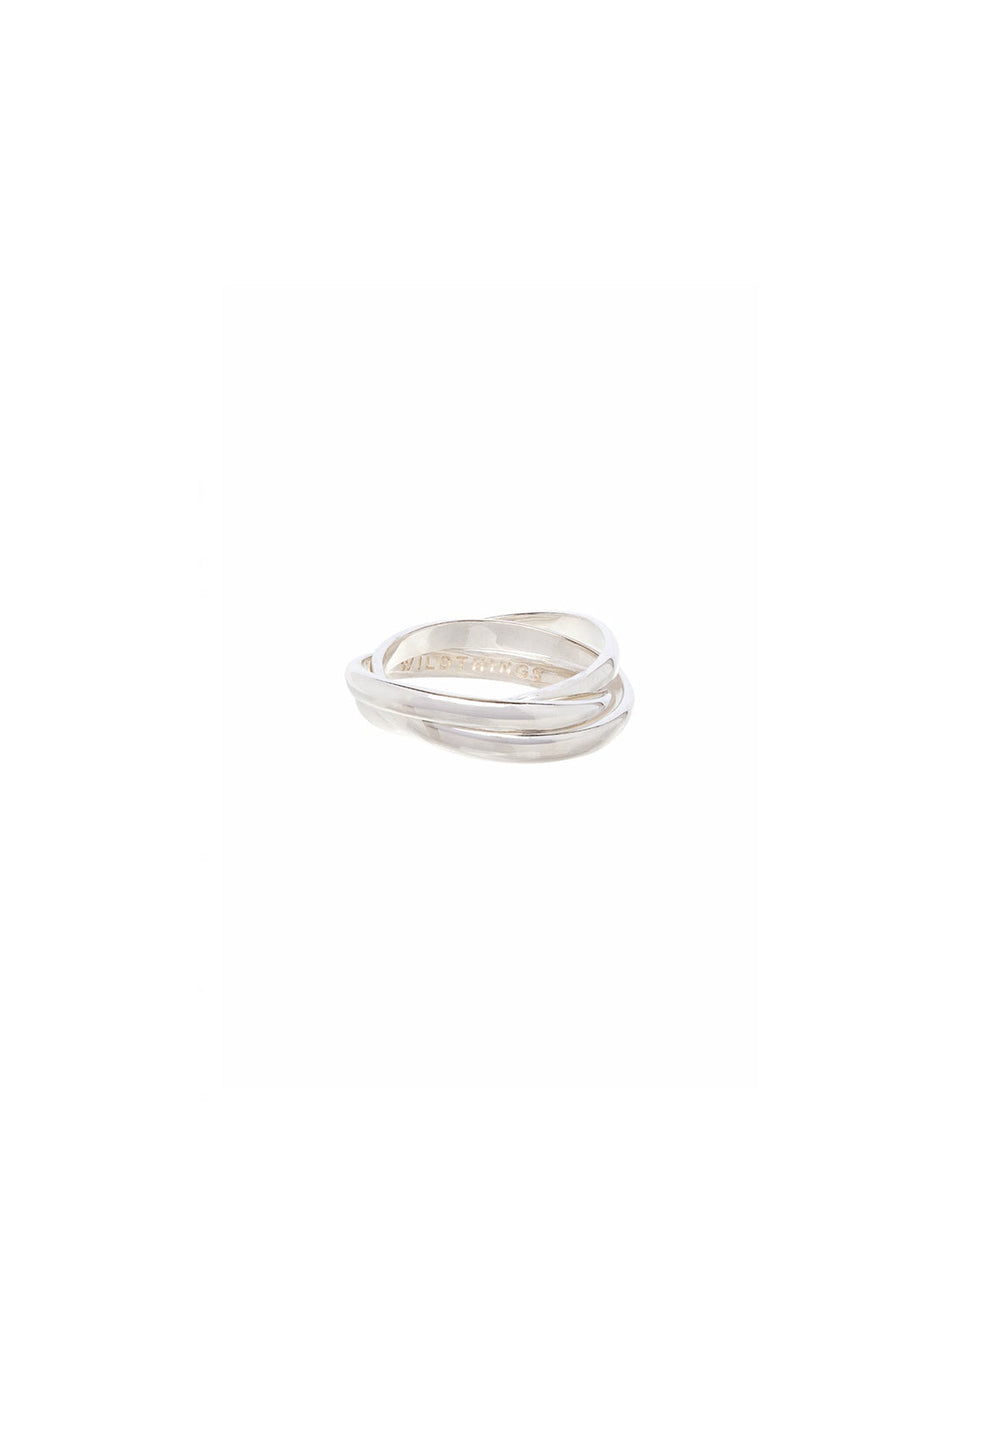 TRINITY PINKY RING SILVER - Moeon